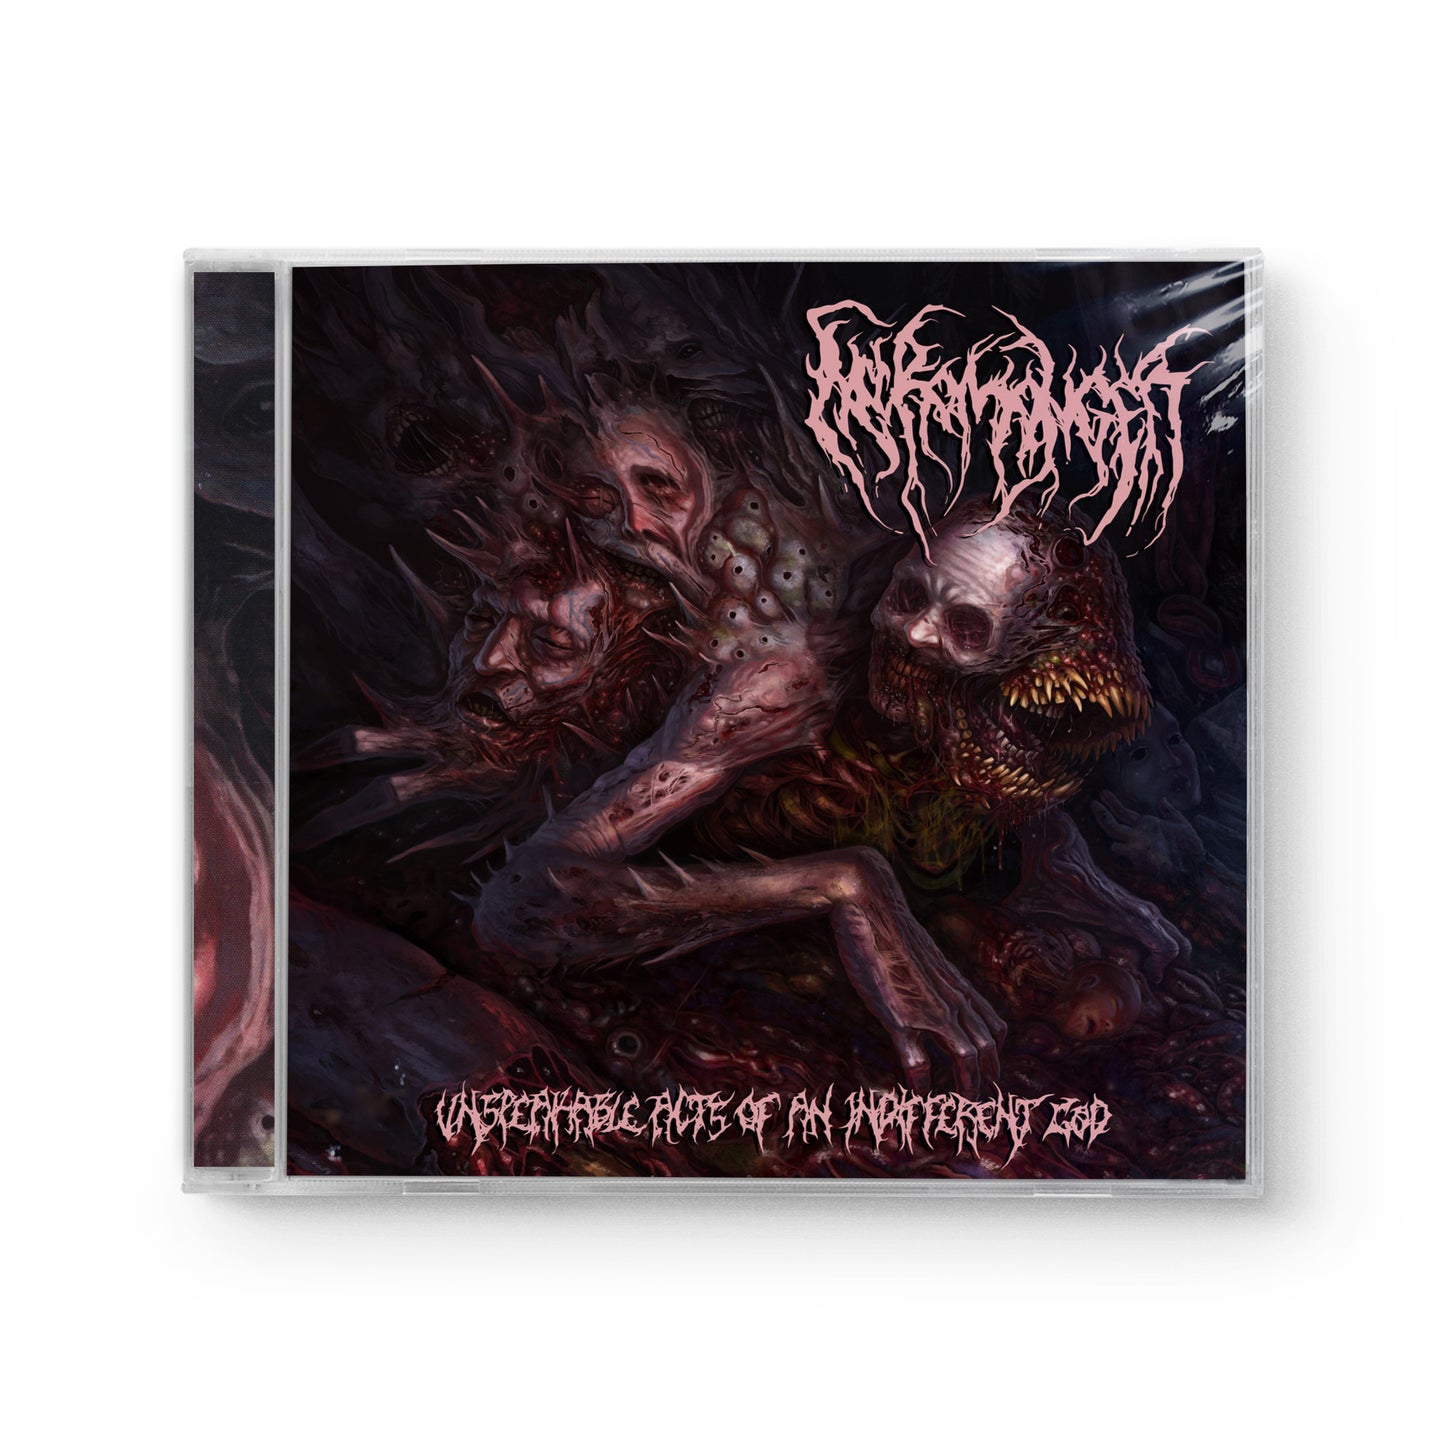 Necromonger "Unspeakable Acts Of An Indifferent God" CD